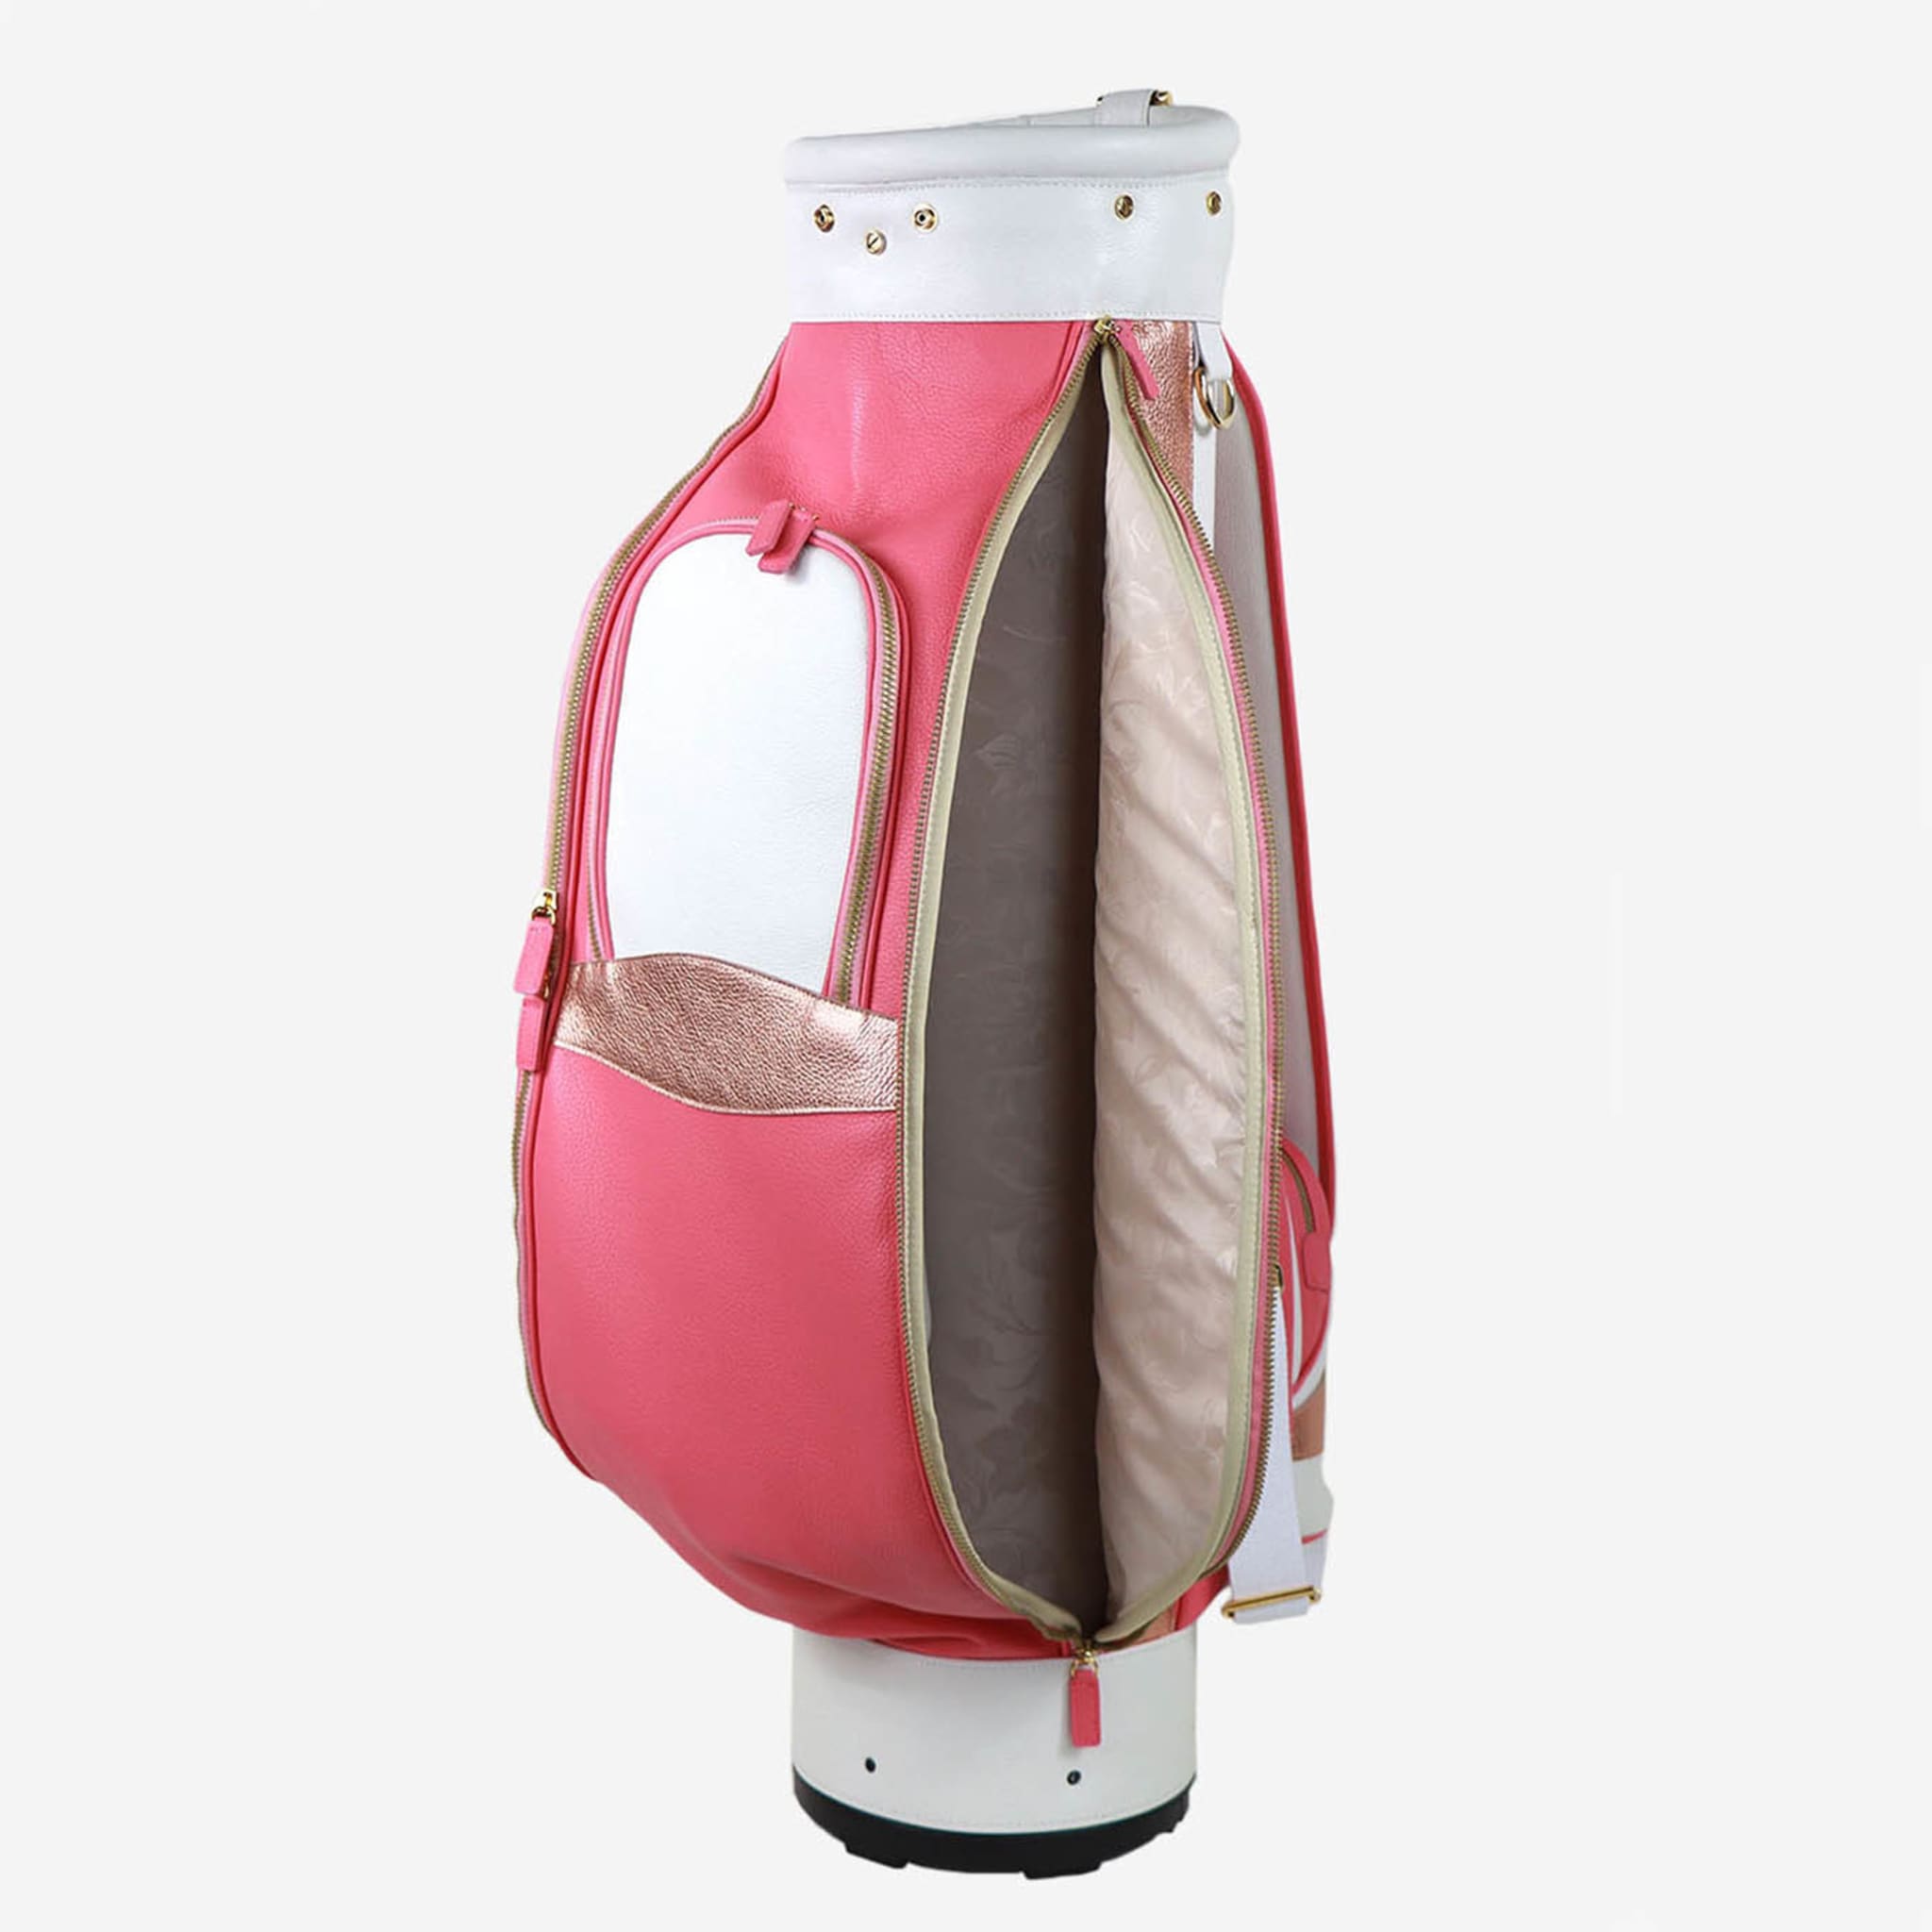 Imperiale Pink & White Leather Golf Bag - Alternative view 3